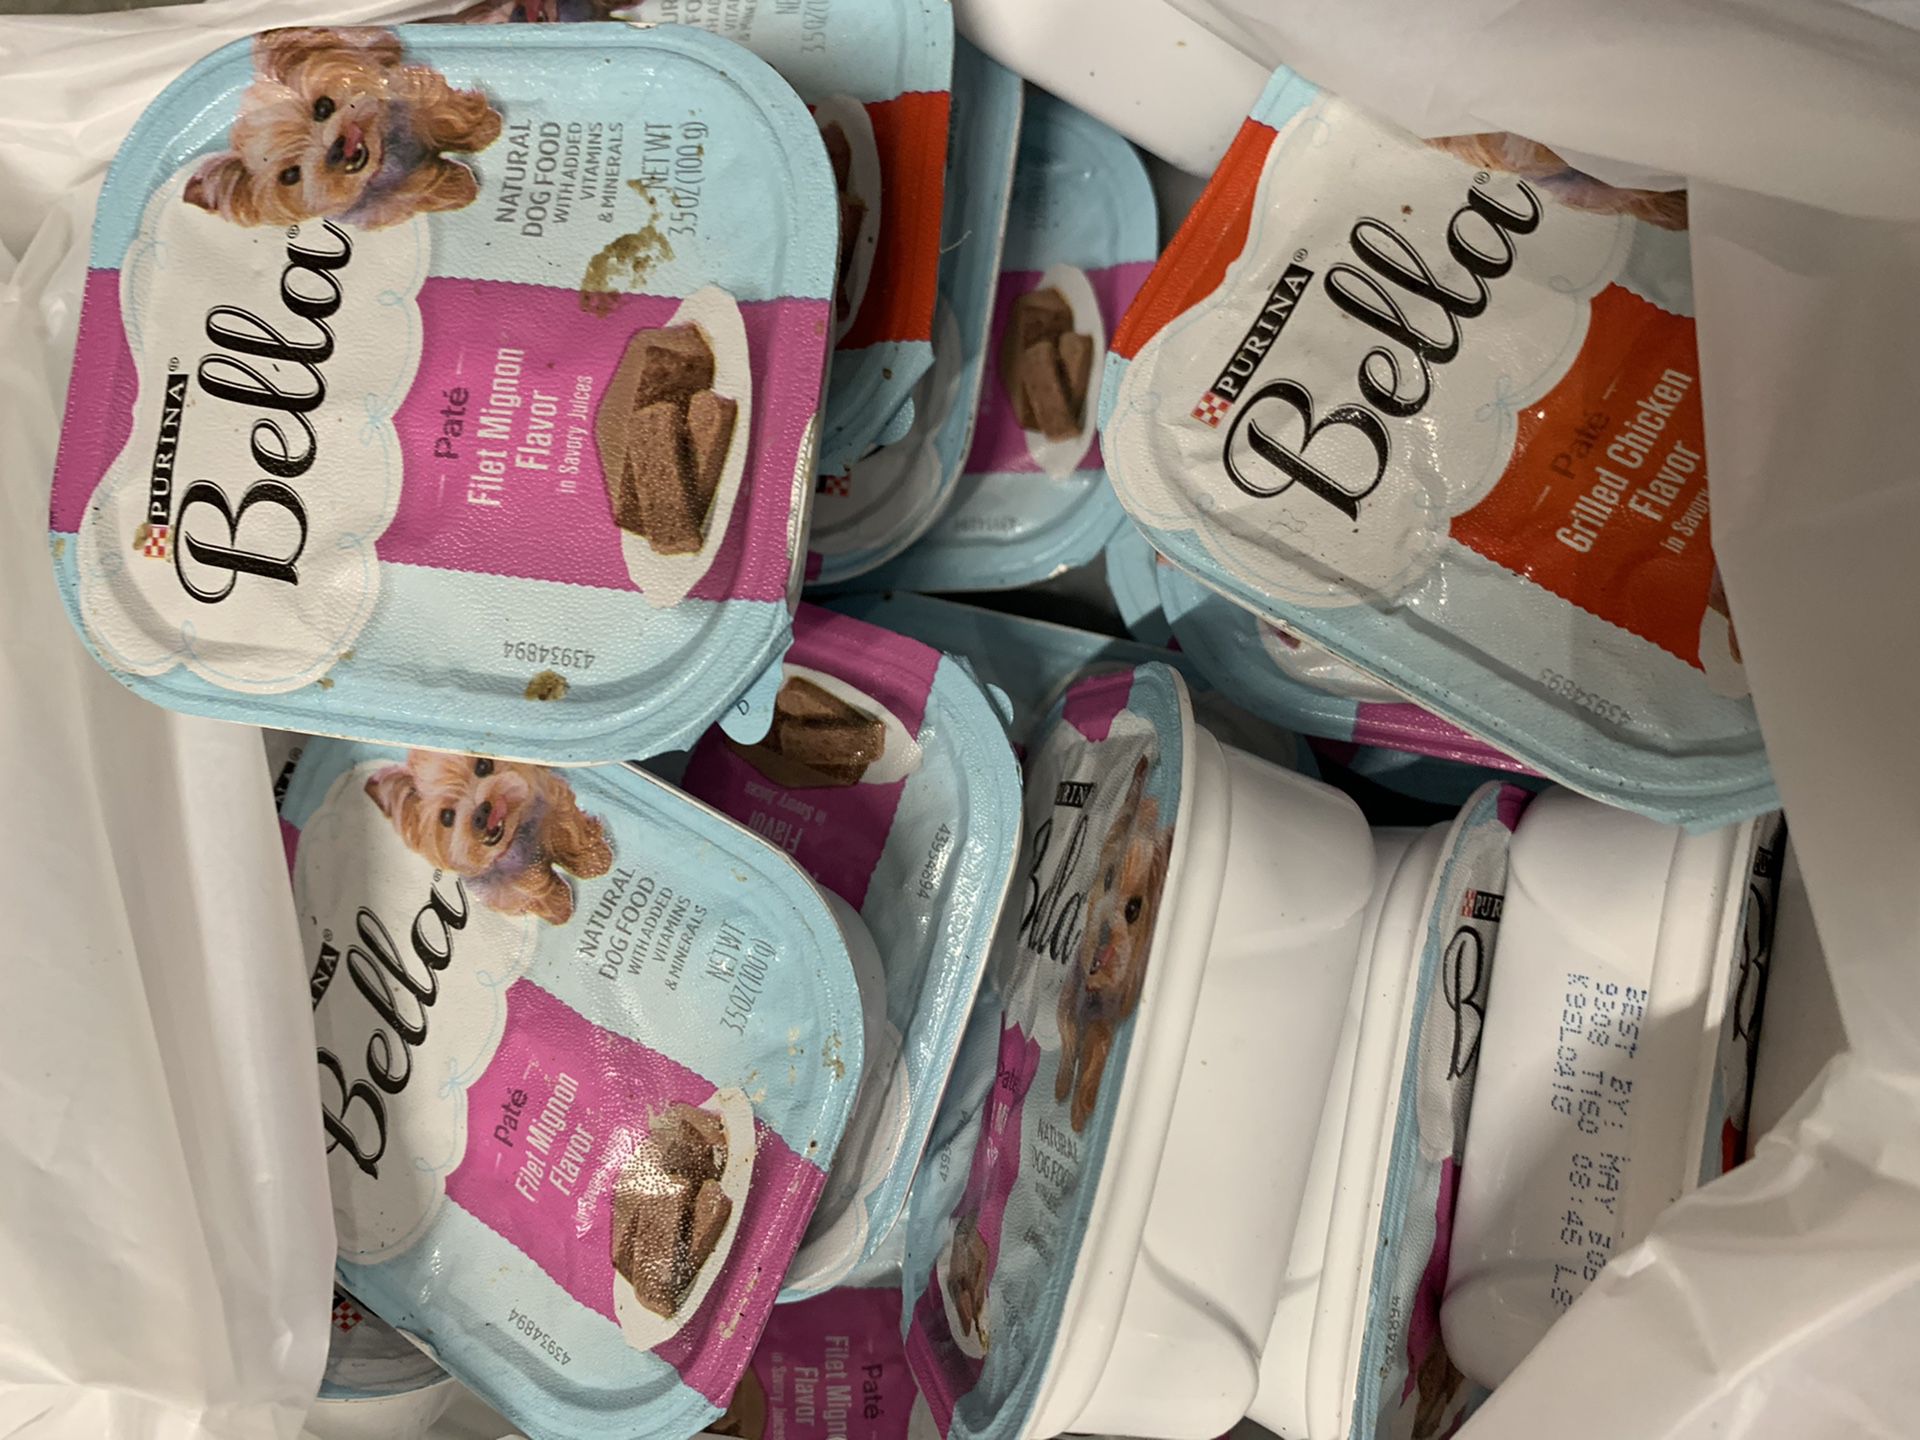 Bella by Purina dog wet food